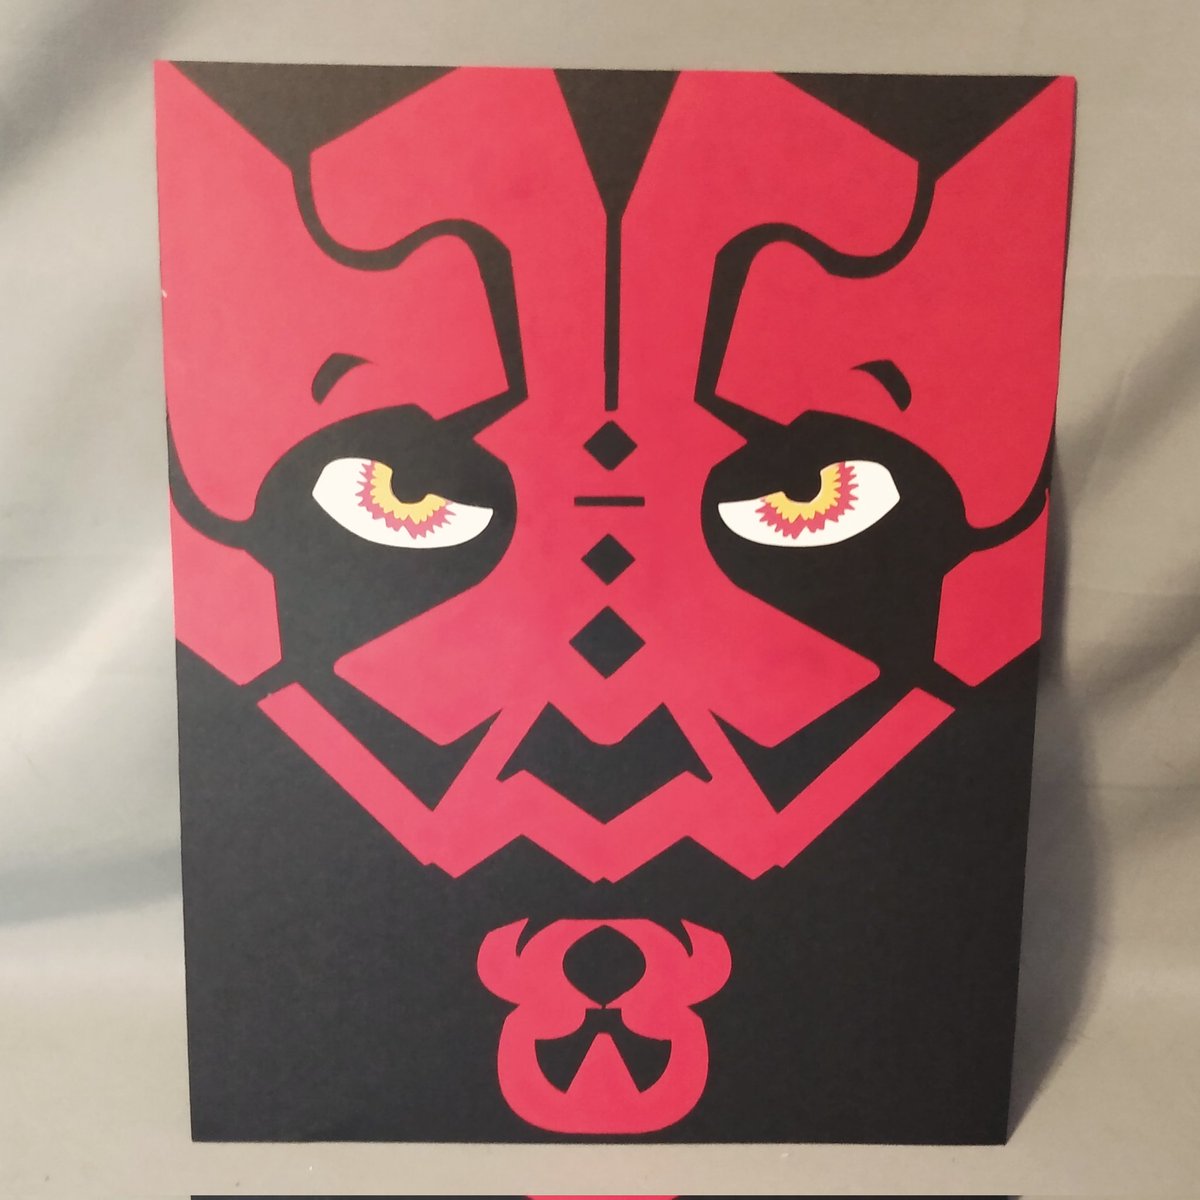 I thought I'd try something different with some Not Really Prints. I was really proud of this Darth Maul, so he ended up as the first. An 8x10 'print' limited run of 5. 

#starwars #darthmaul #papercrafts #papercraft #artprint #handmade #cubedudes